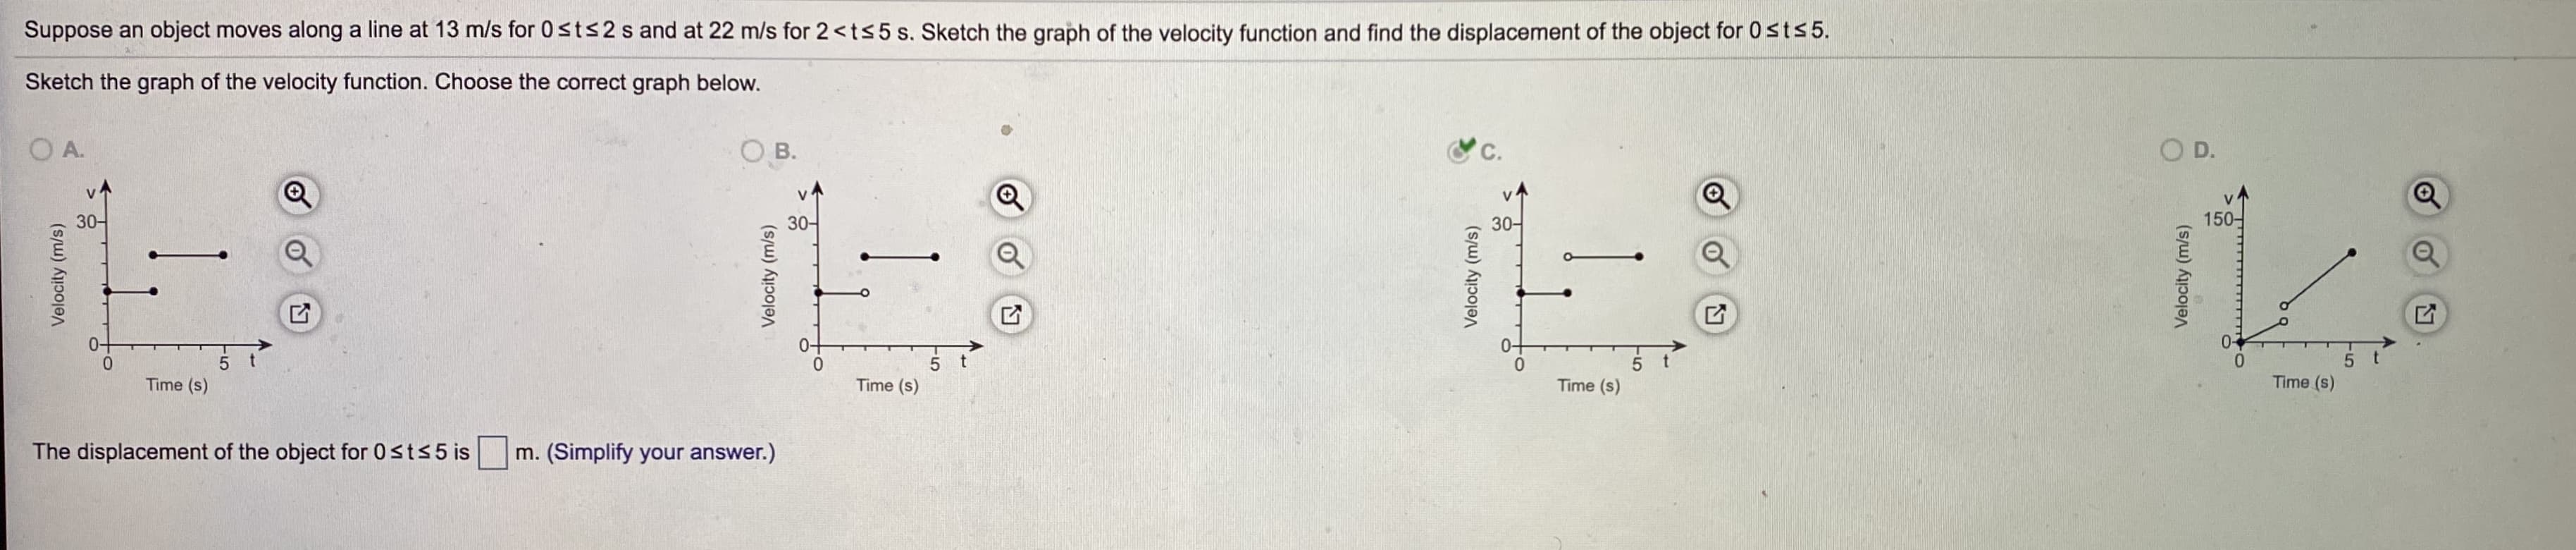 Suppose an object moves along a line at 13 m/s for 0sts2 s and at 22 m/s for 2<ts5s. Sketch the graph of the velocity function and find the displacement of the object for 0sts5.
